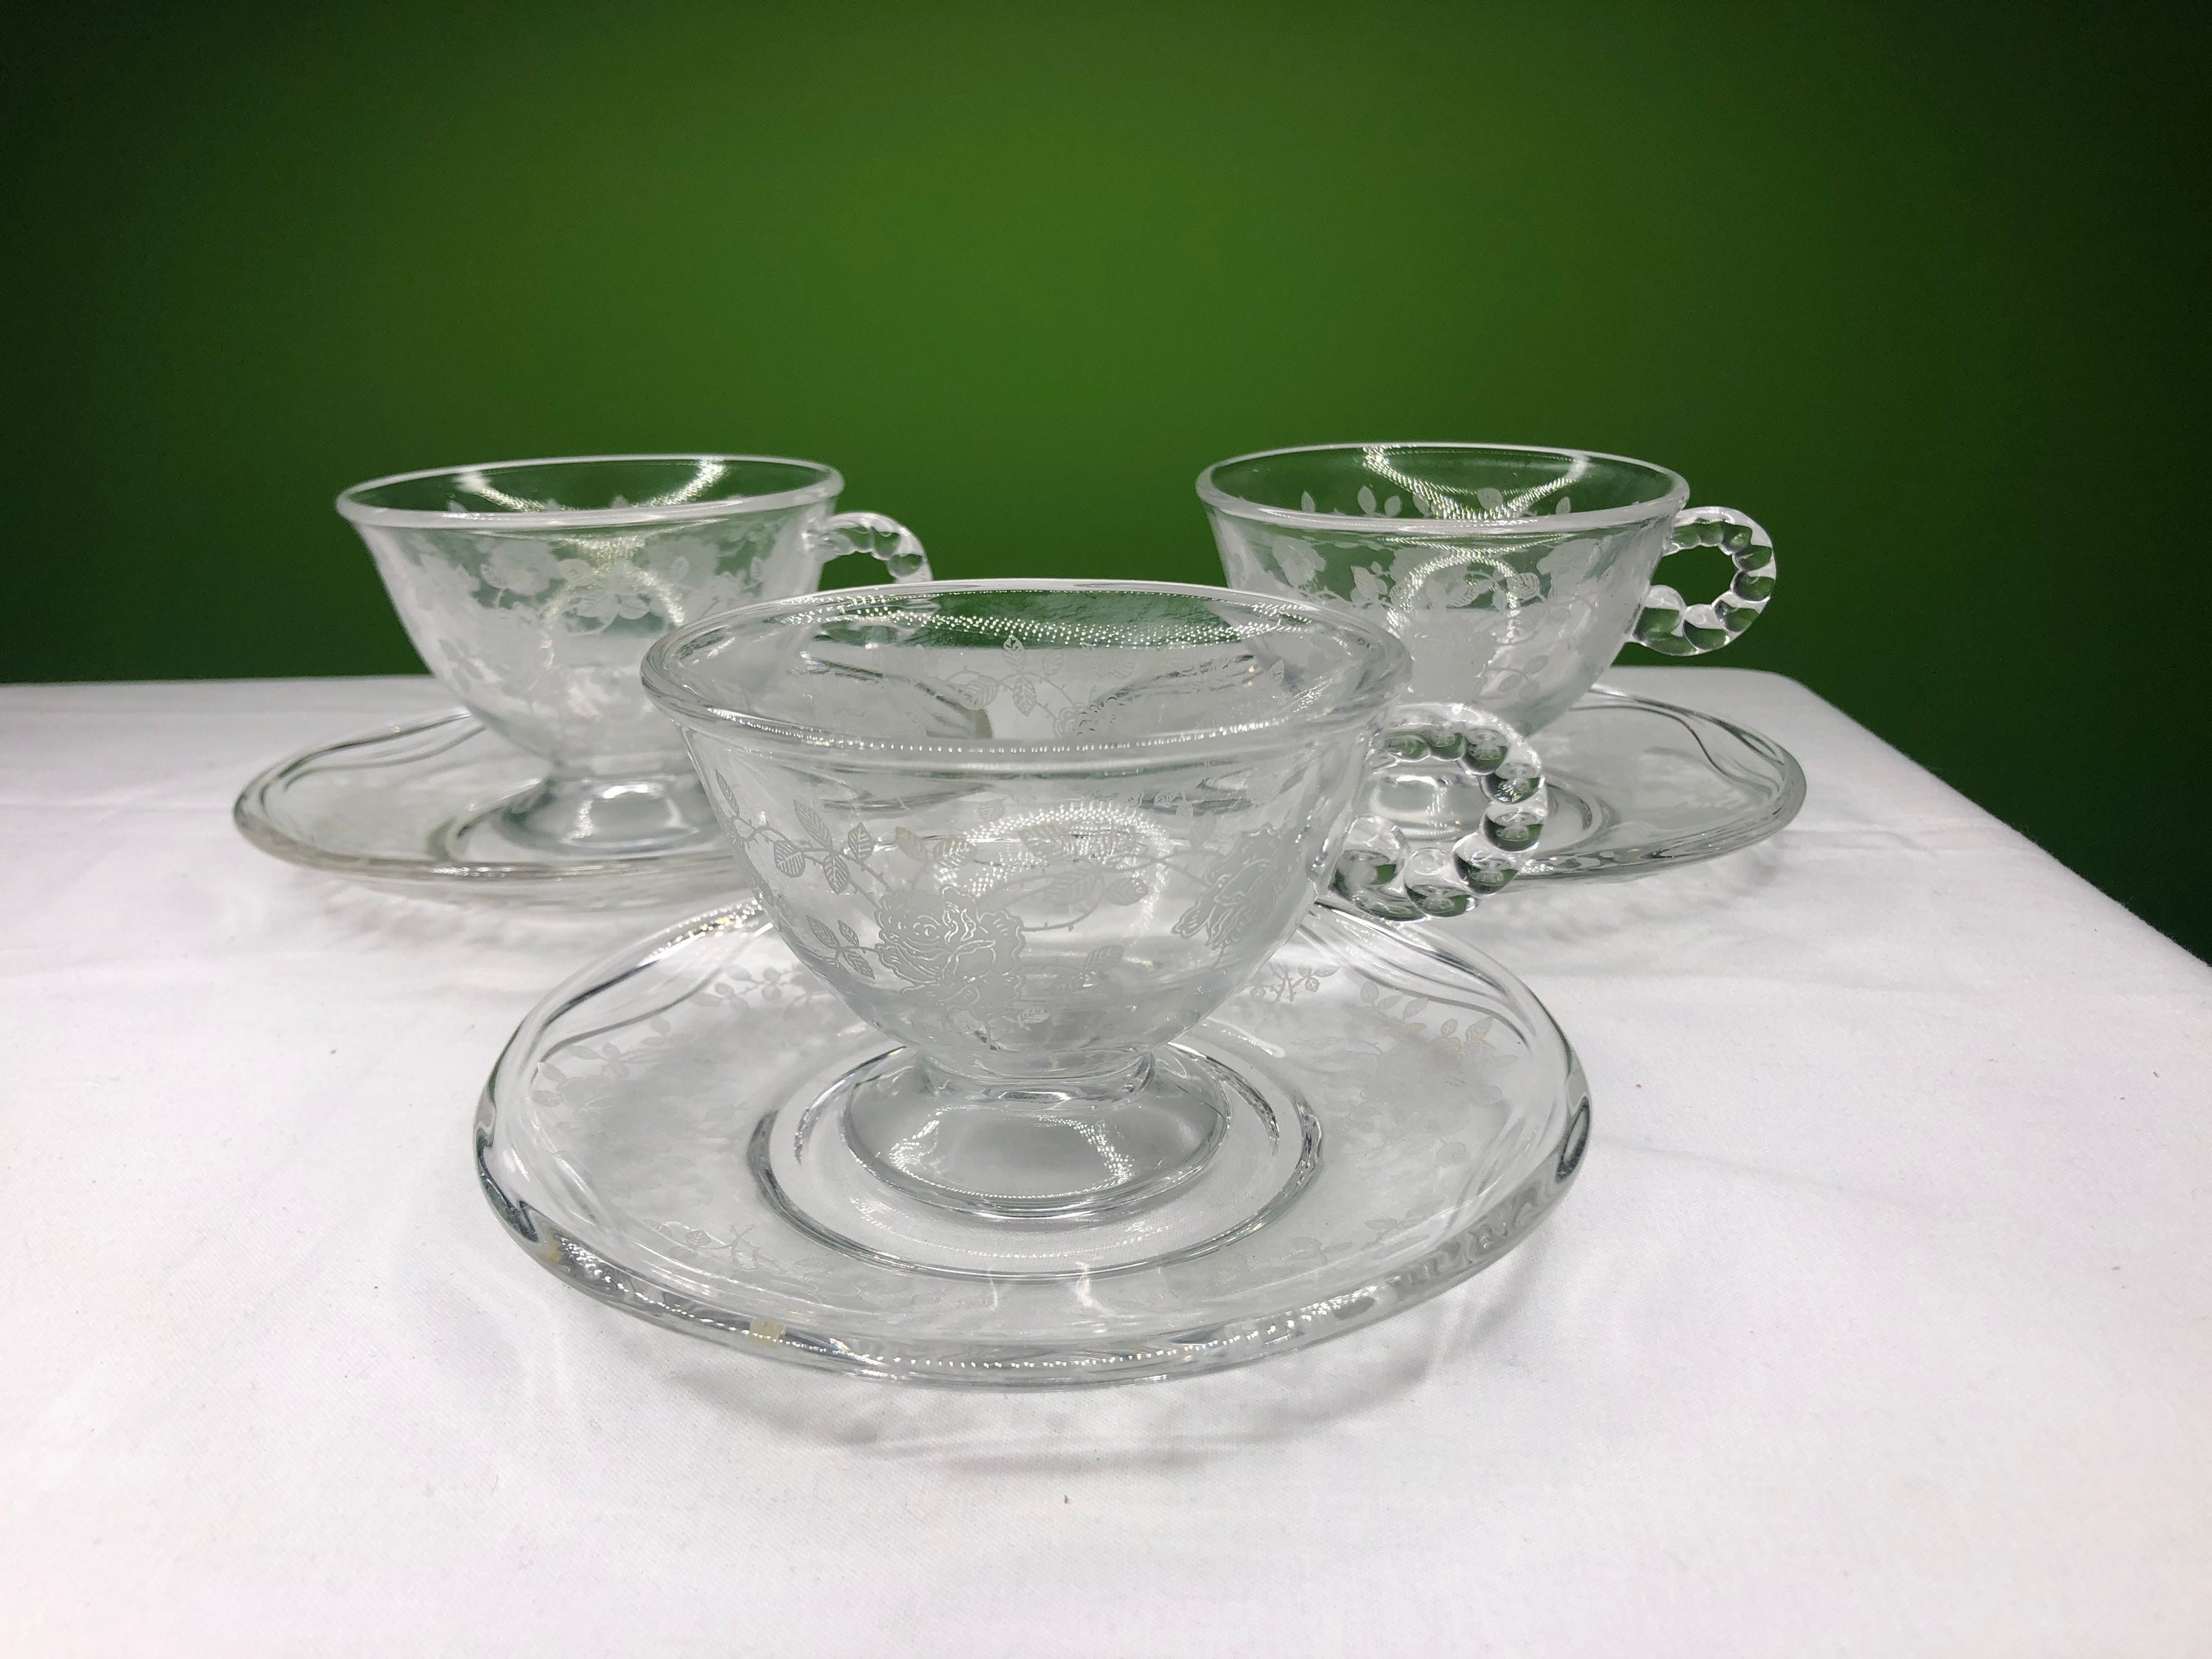 8 oz Glass Tea Cups and Saucer Set, Clear Tea Cups Set Clear Coffee Cups  with Handles for Latte, Cap…See more 8 oz Glass Tea Cups and Saucer Set